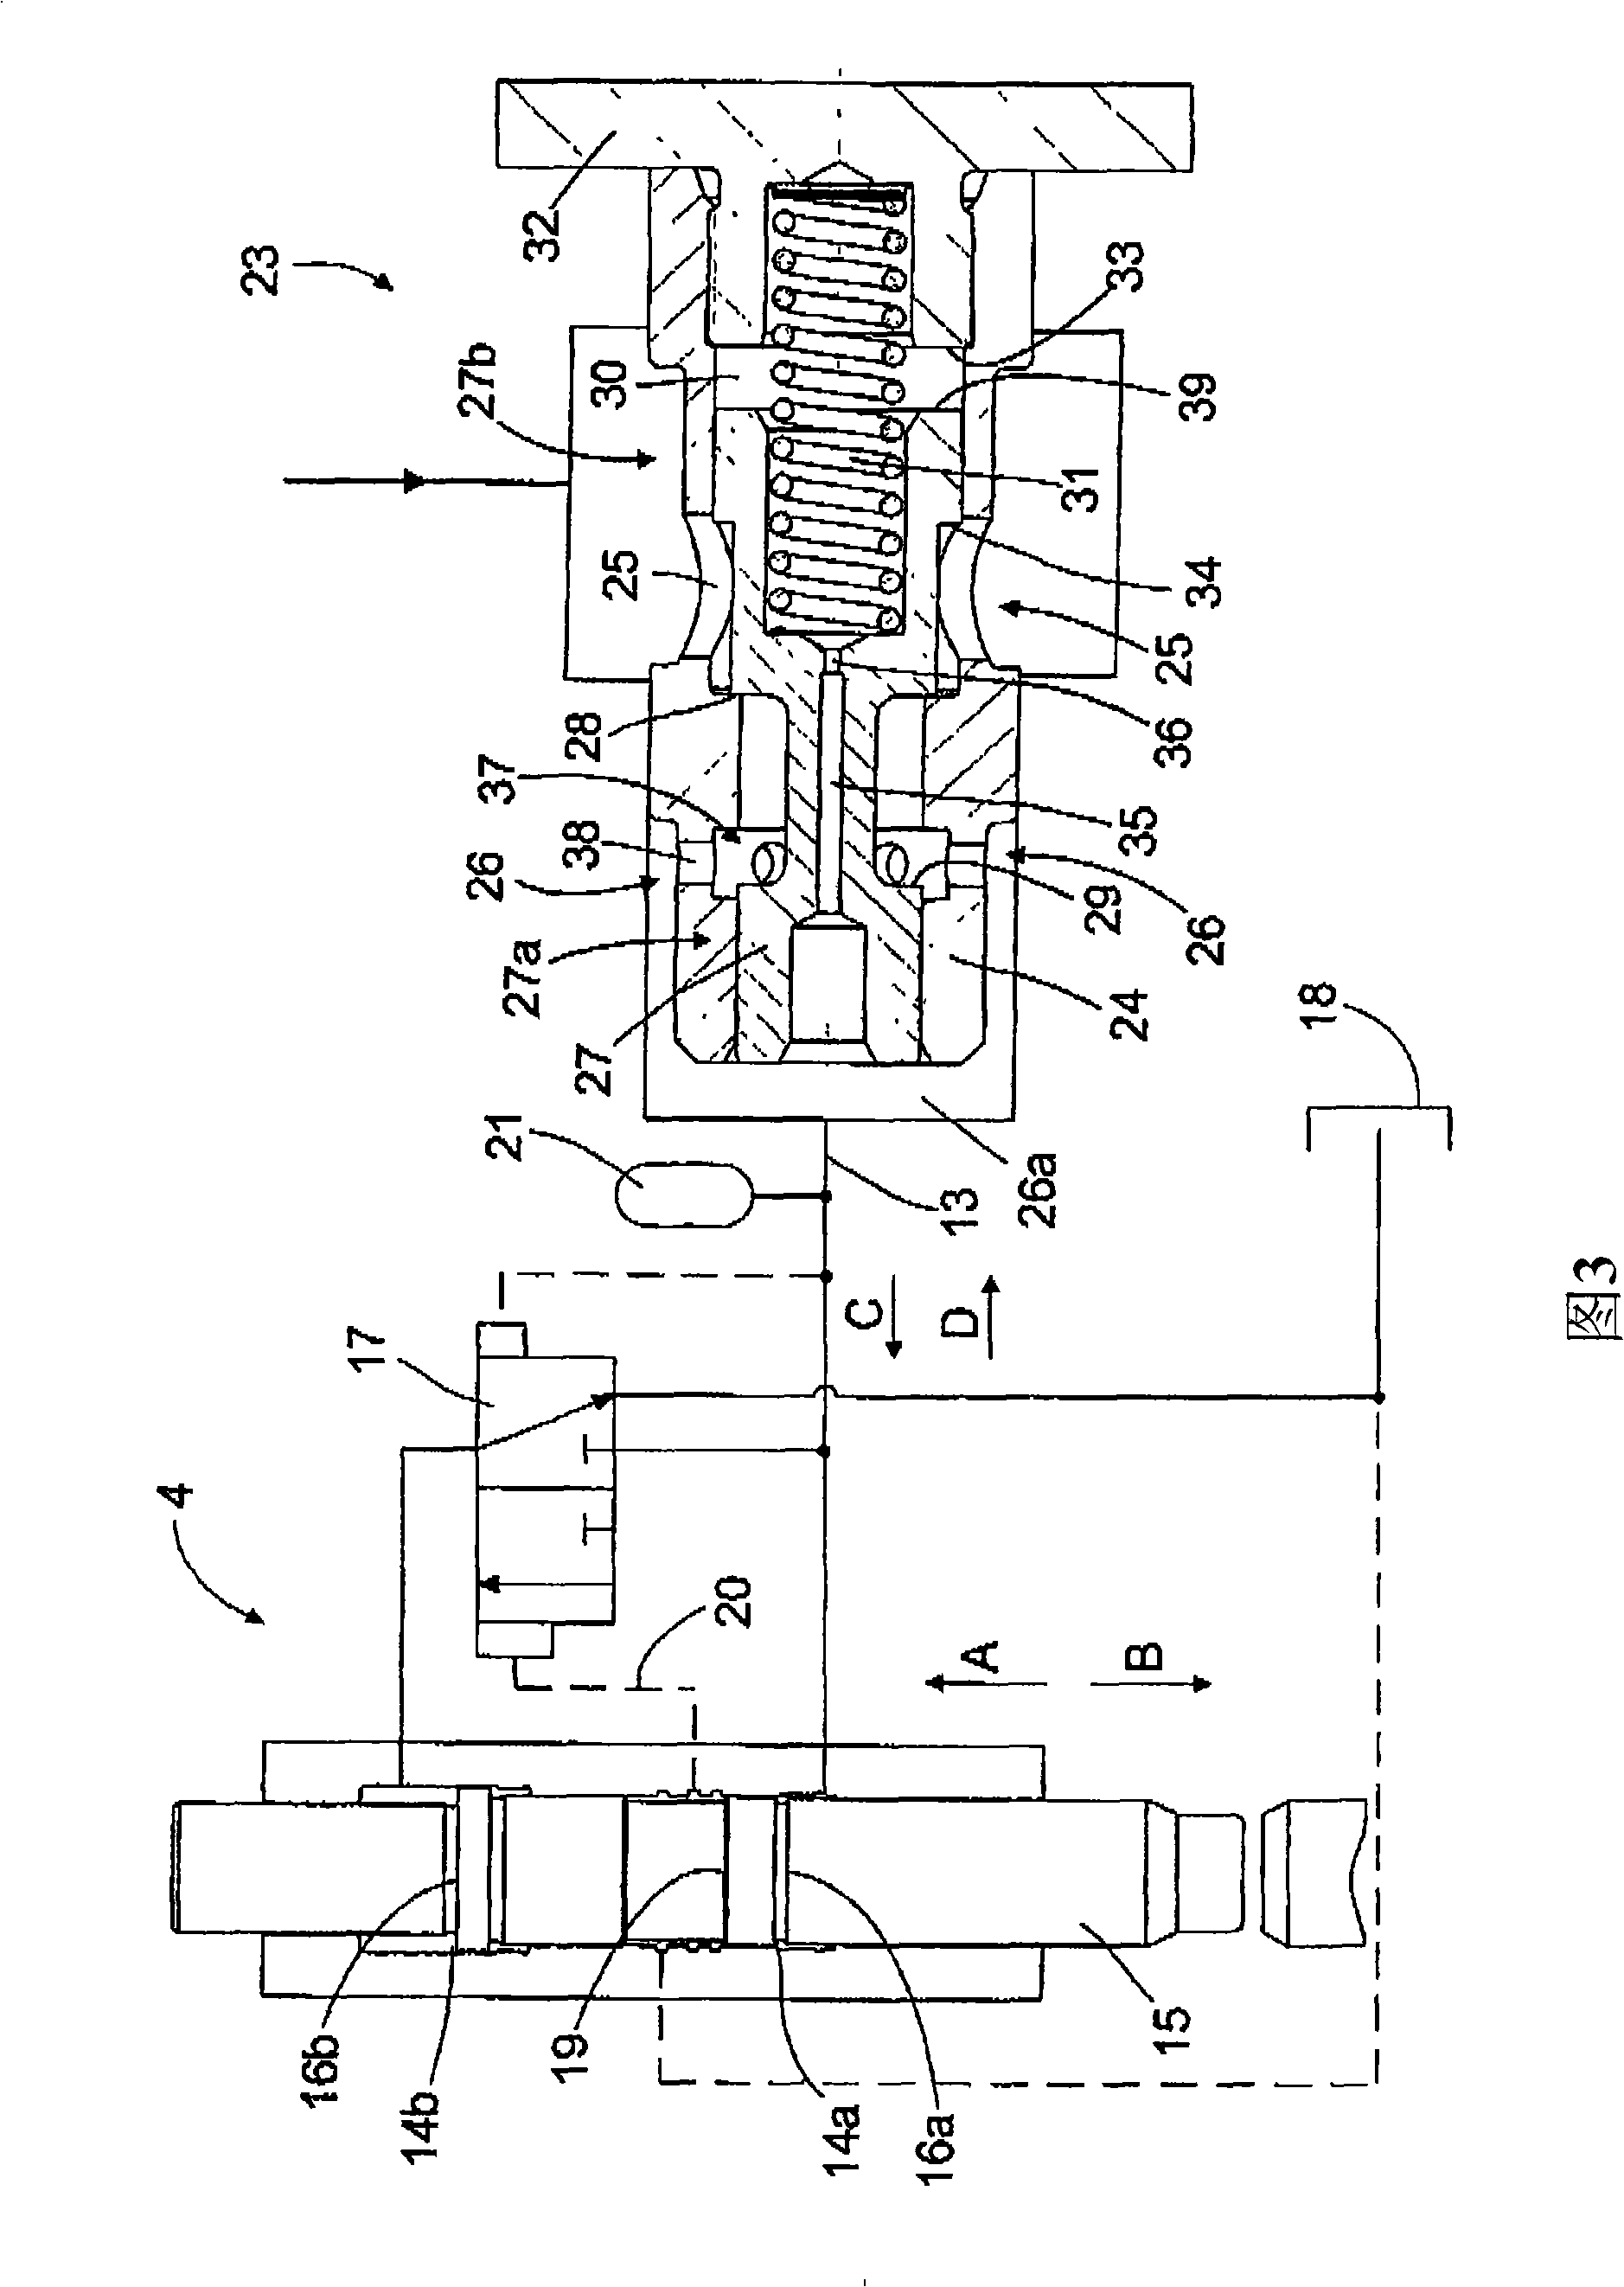 Rock breaking device, protection valve and a method of operating a rock breaking device